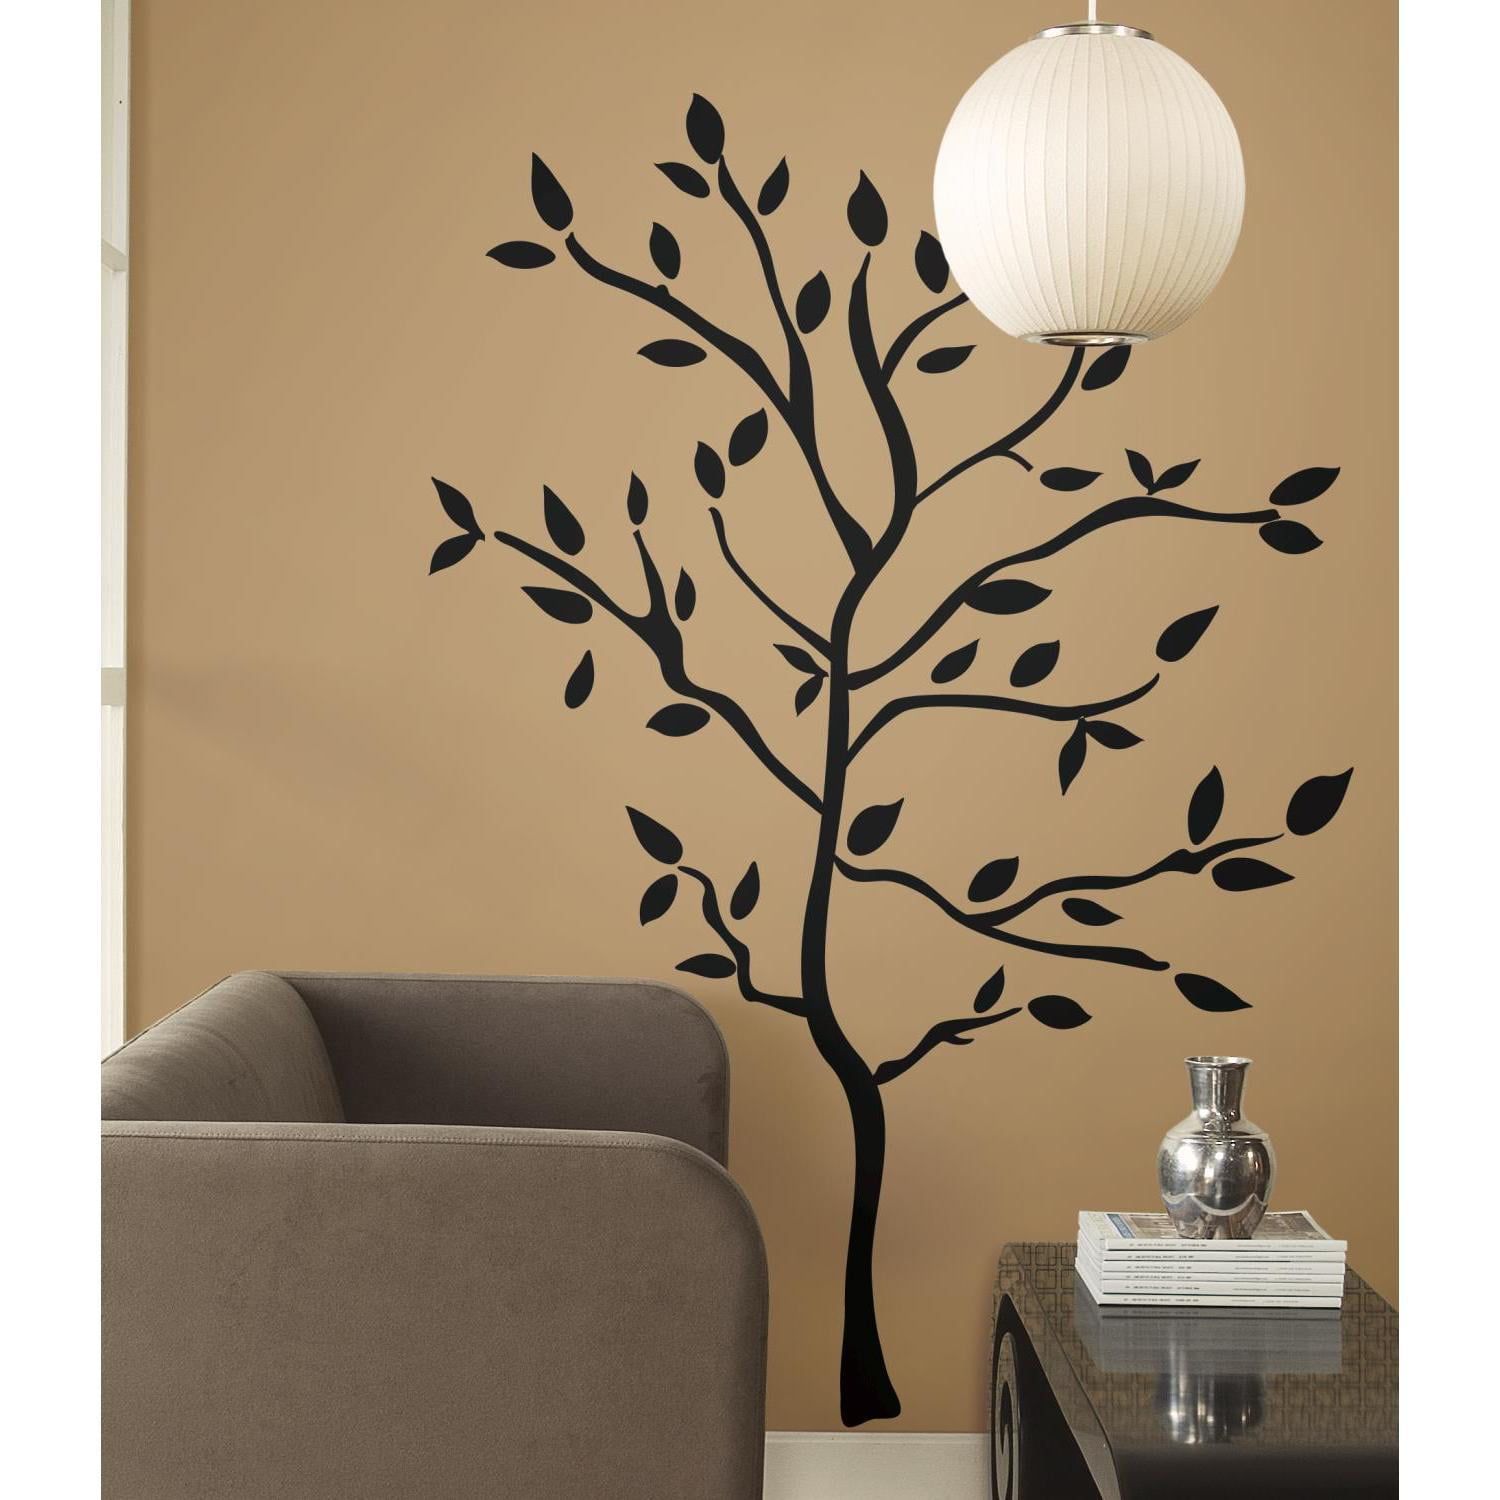 Huge Black/Brown Family Photo Frame Tree Branch & Leaves wall decal sticker Black 